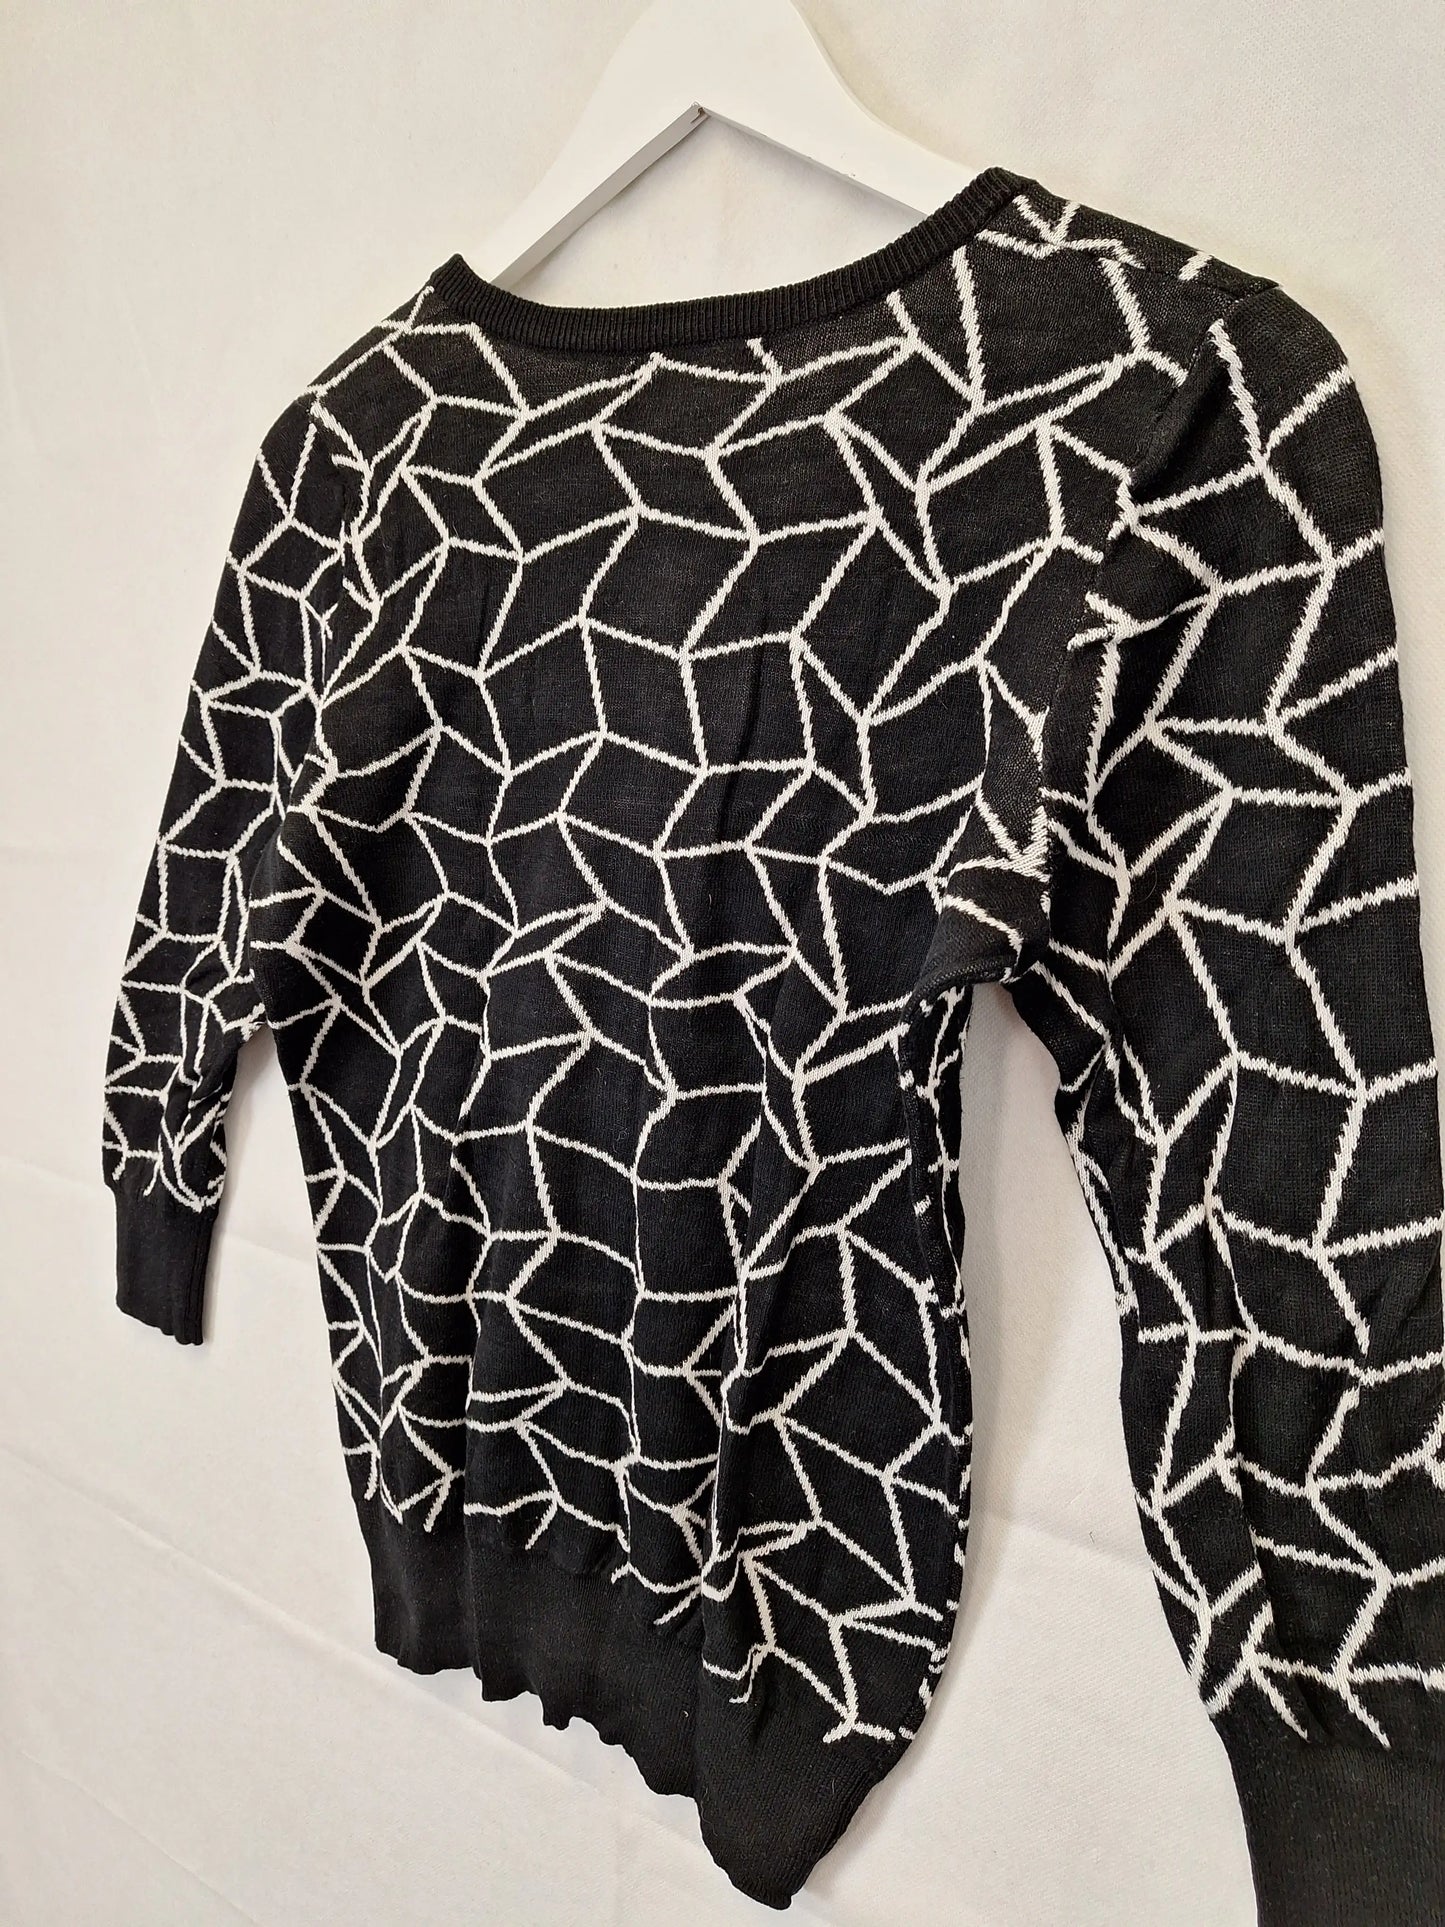 Basque Spider Web Cardigan Size 8 by SwapUp-Online Second Hand Store-Online Thrift Store